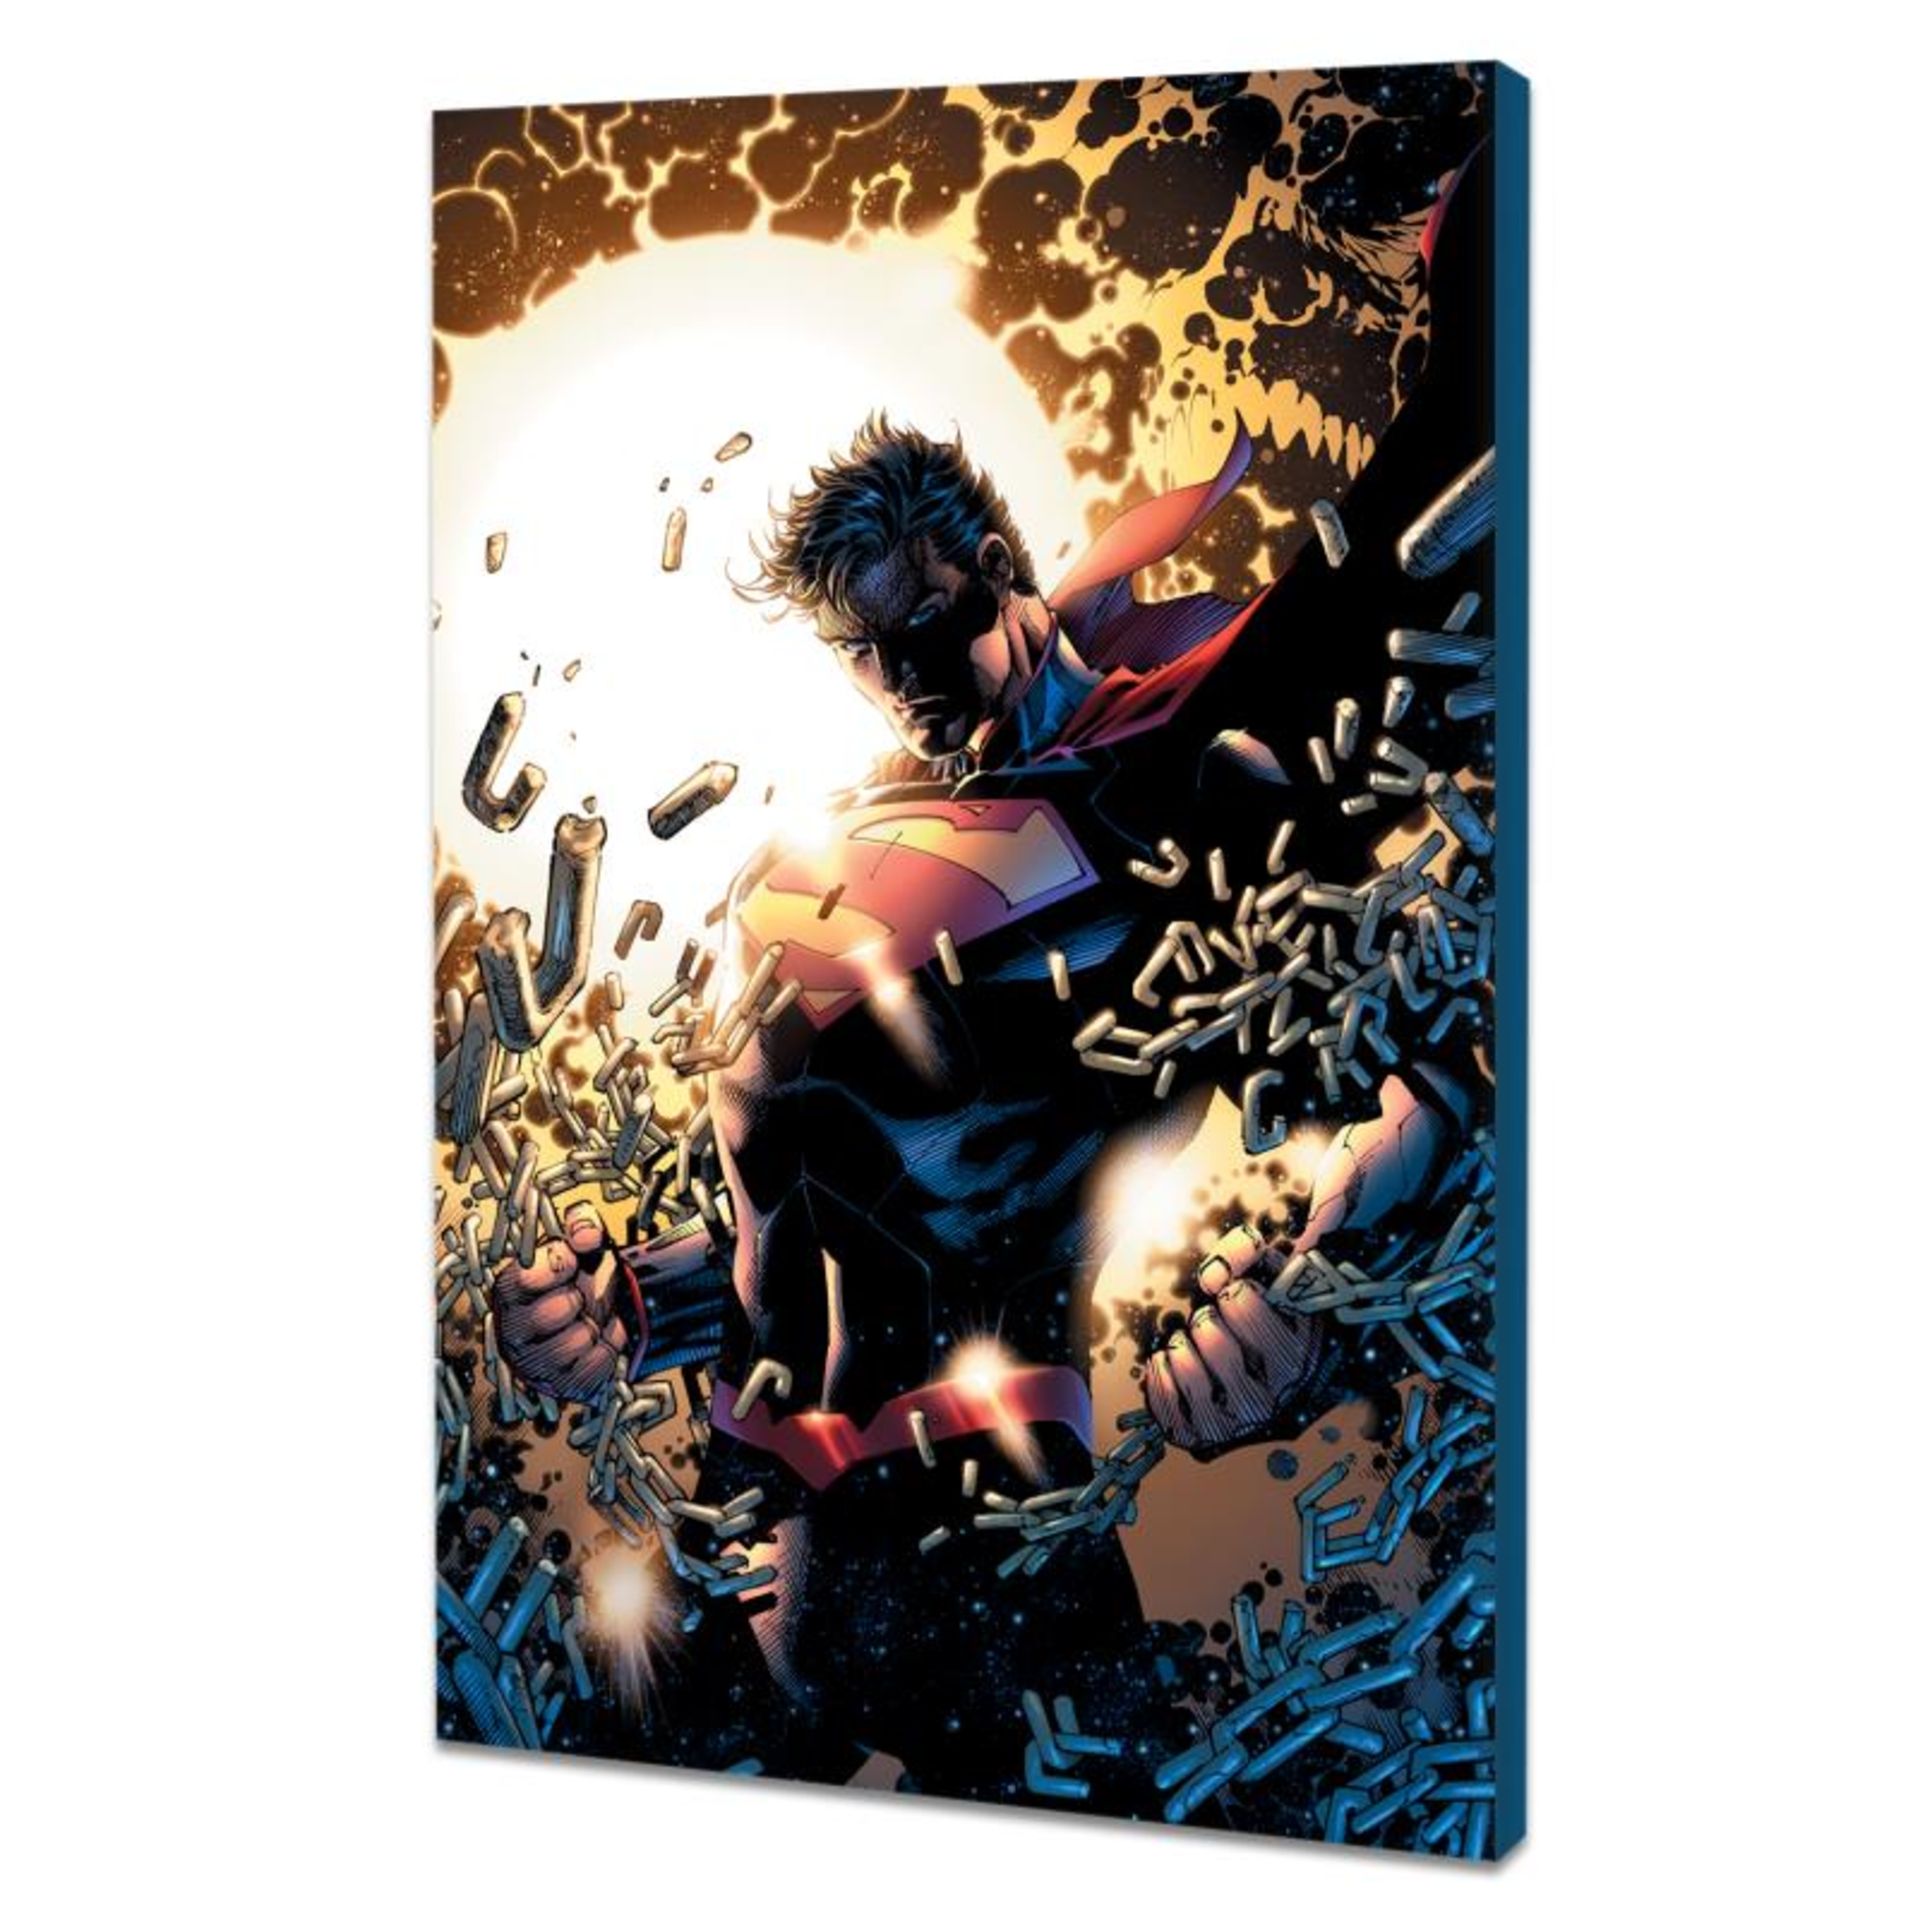 DC Comics, "Superman Unchained" Numbered Limited Edition Giclee on Canvas by Jim - Image 3 of 3